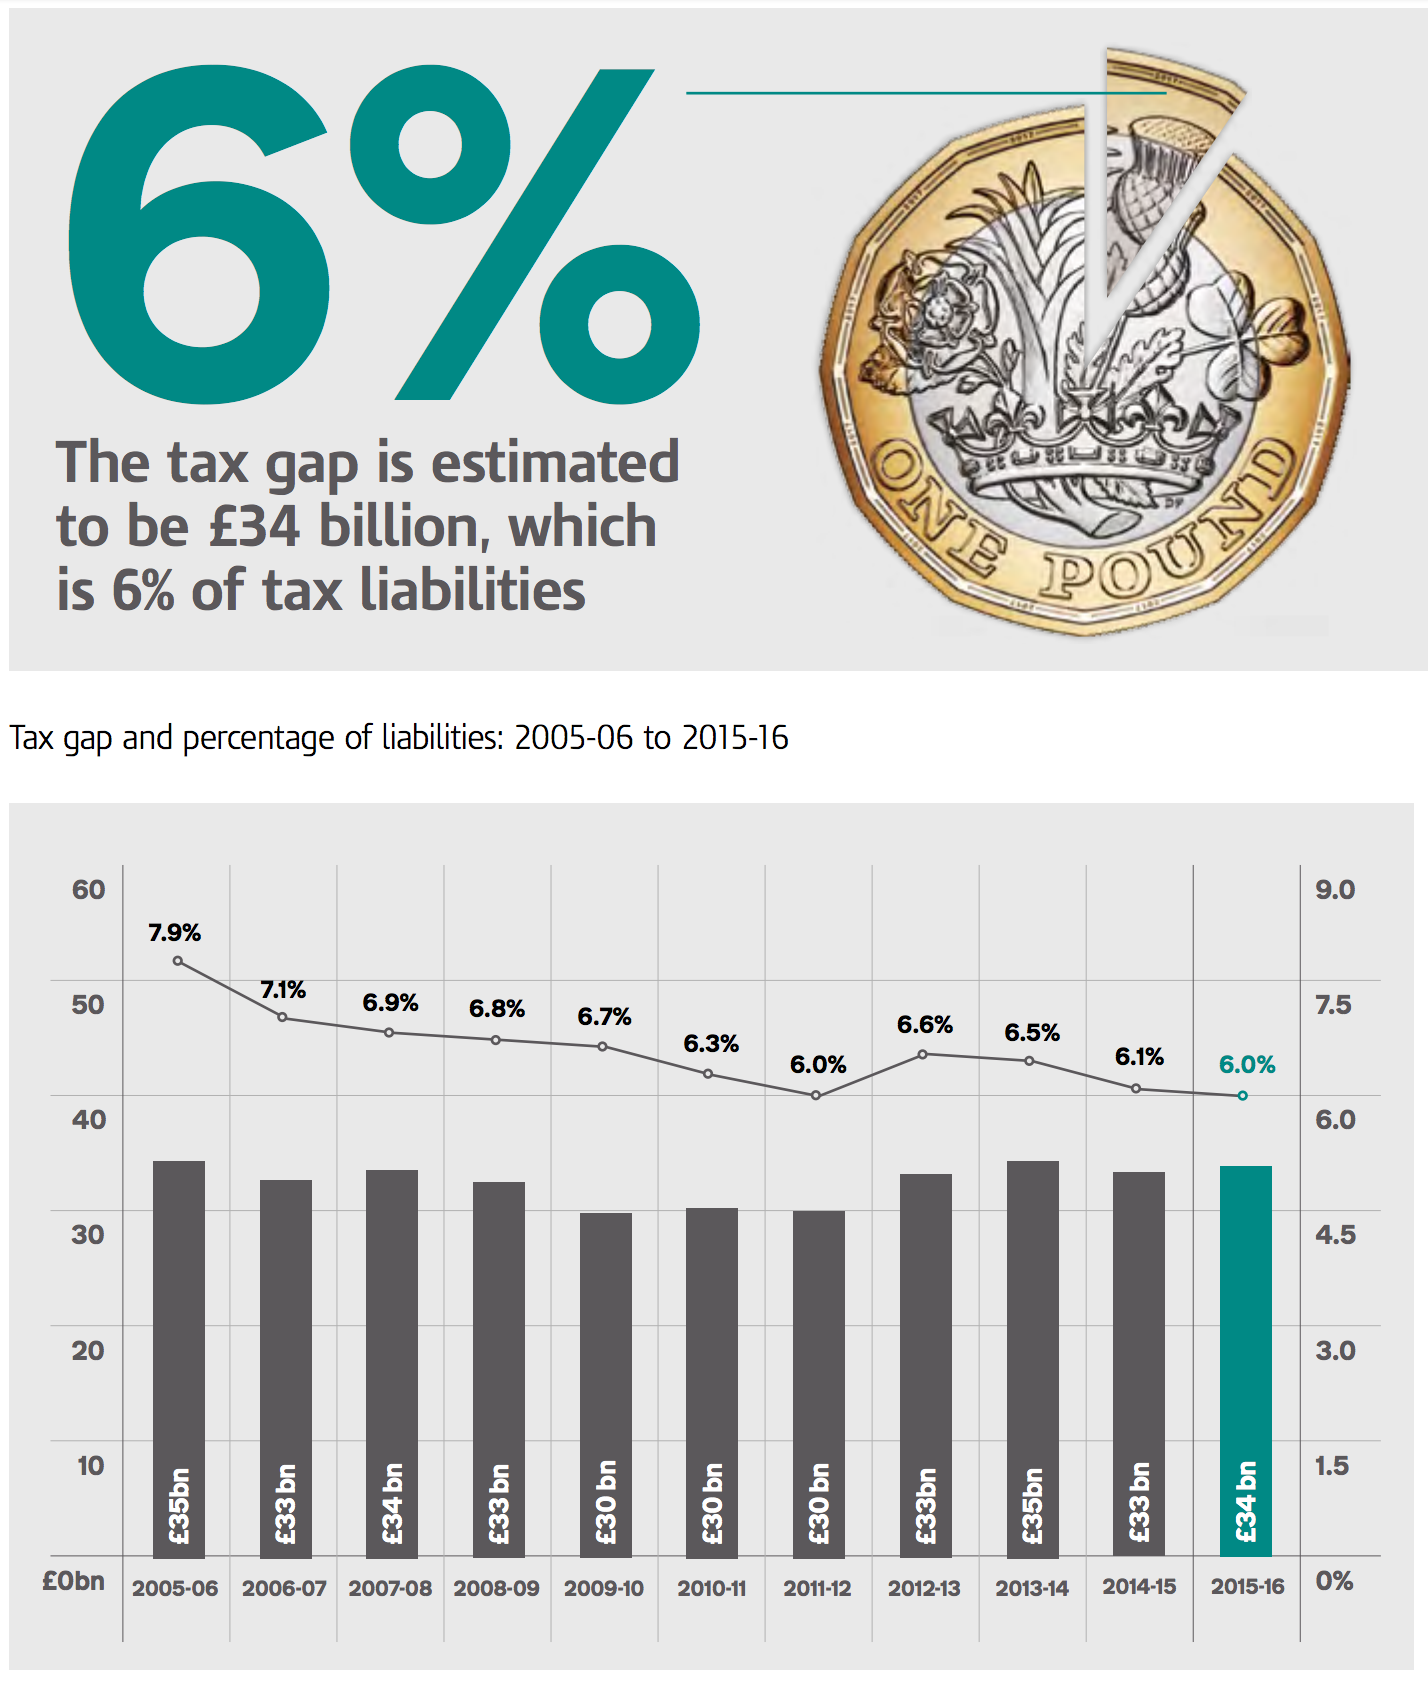 hmrc-s-new-tax-gap-data-too-predictable-to-be-reliable